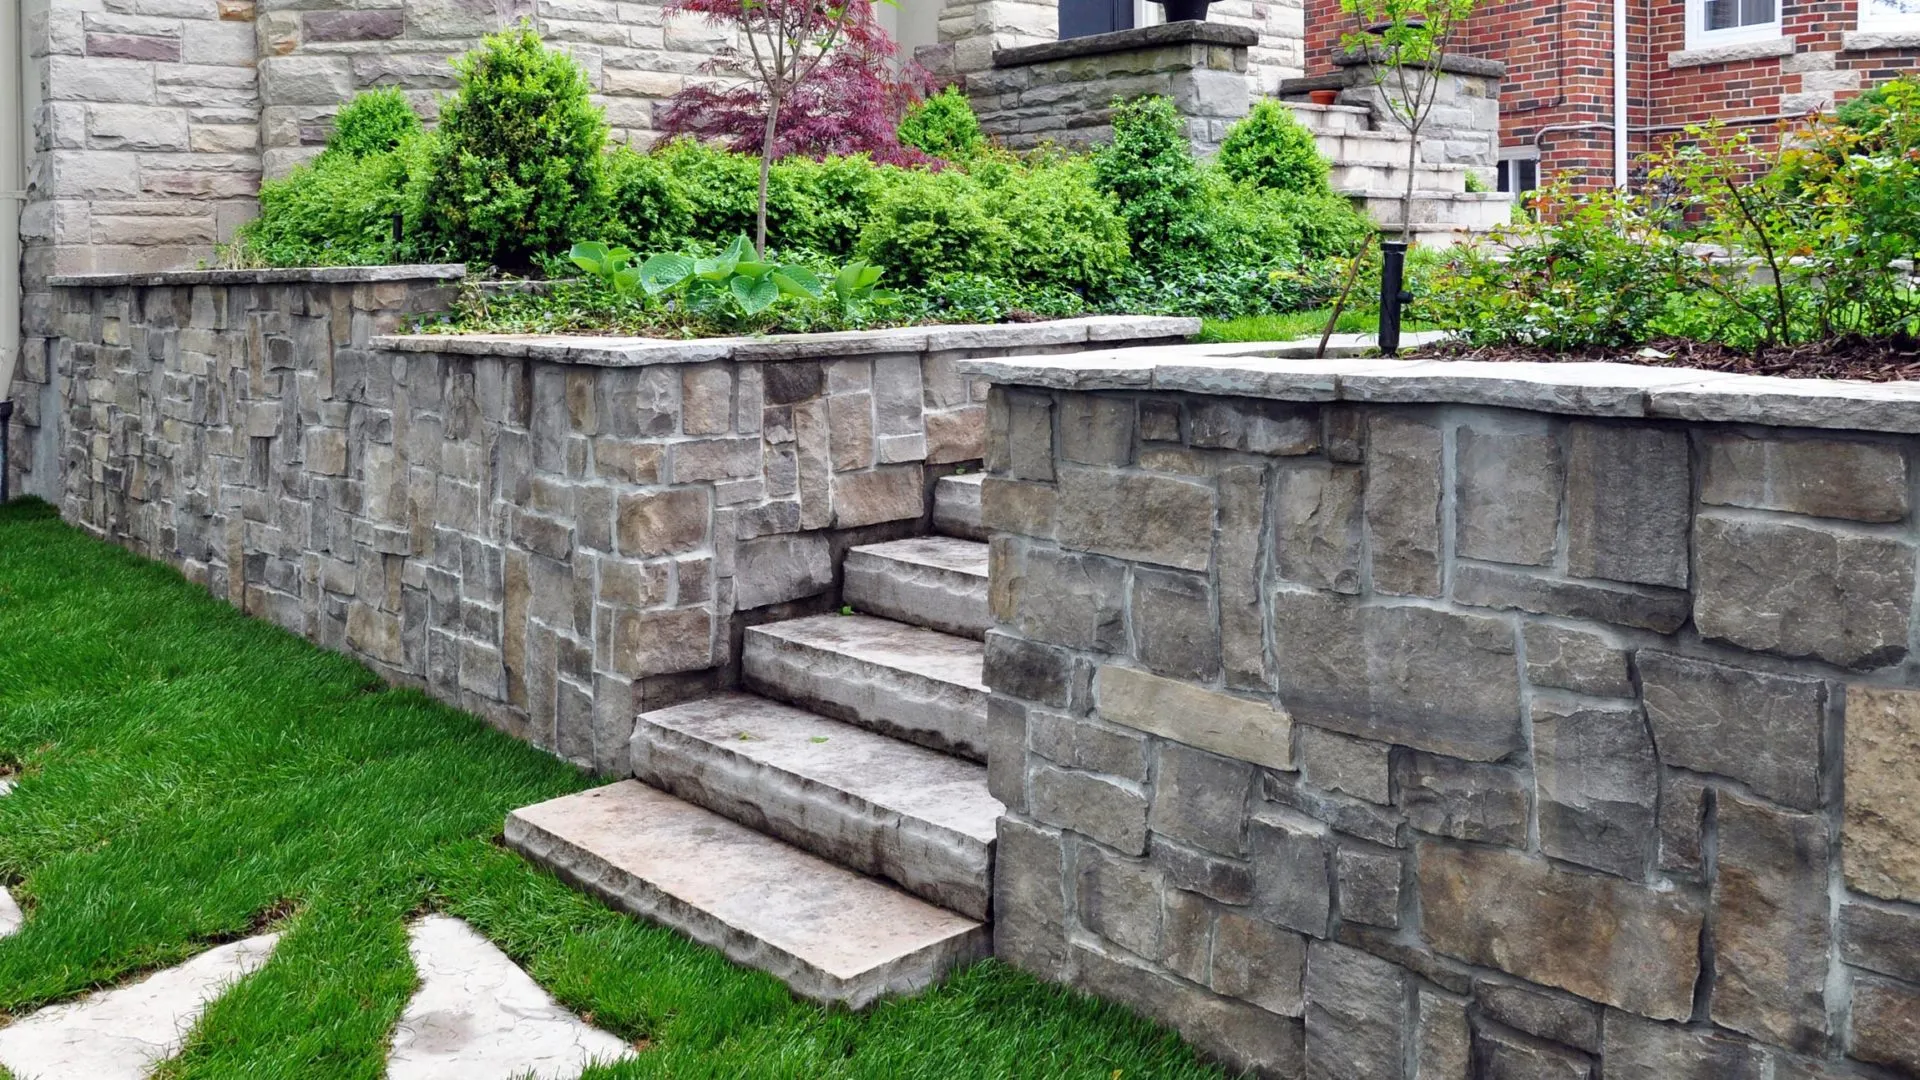 Stone retaining wall with stairs and landscaped flower beds